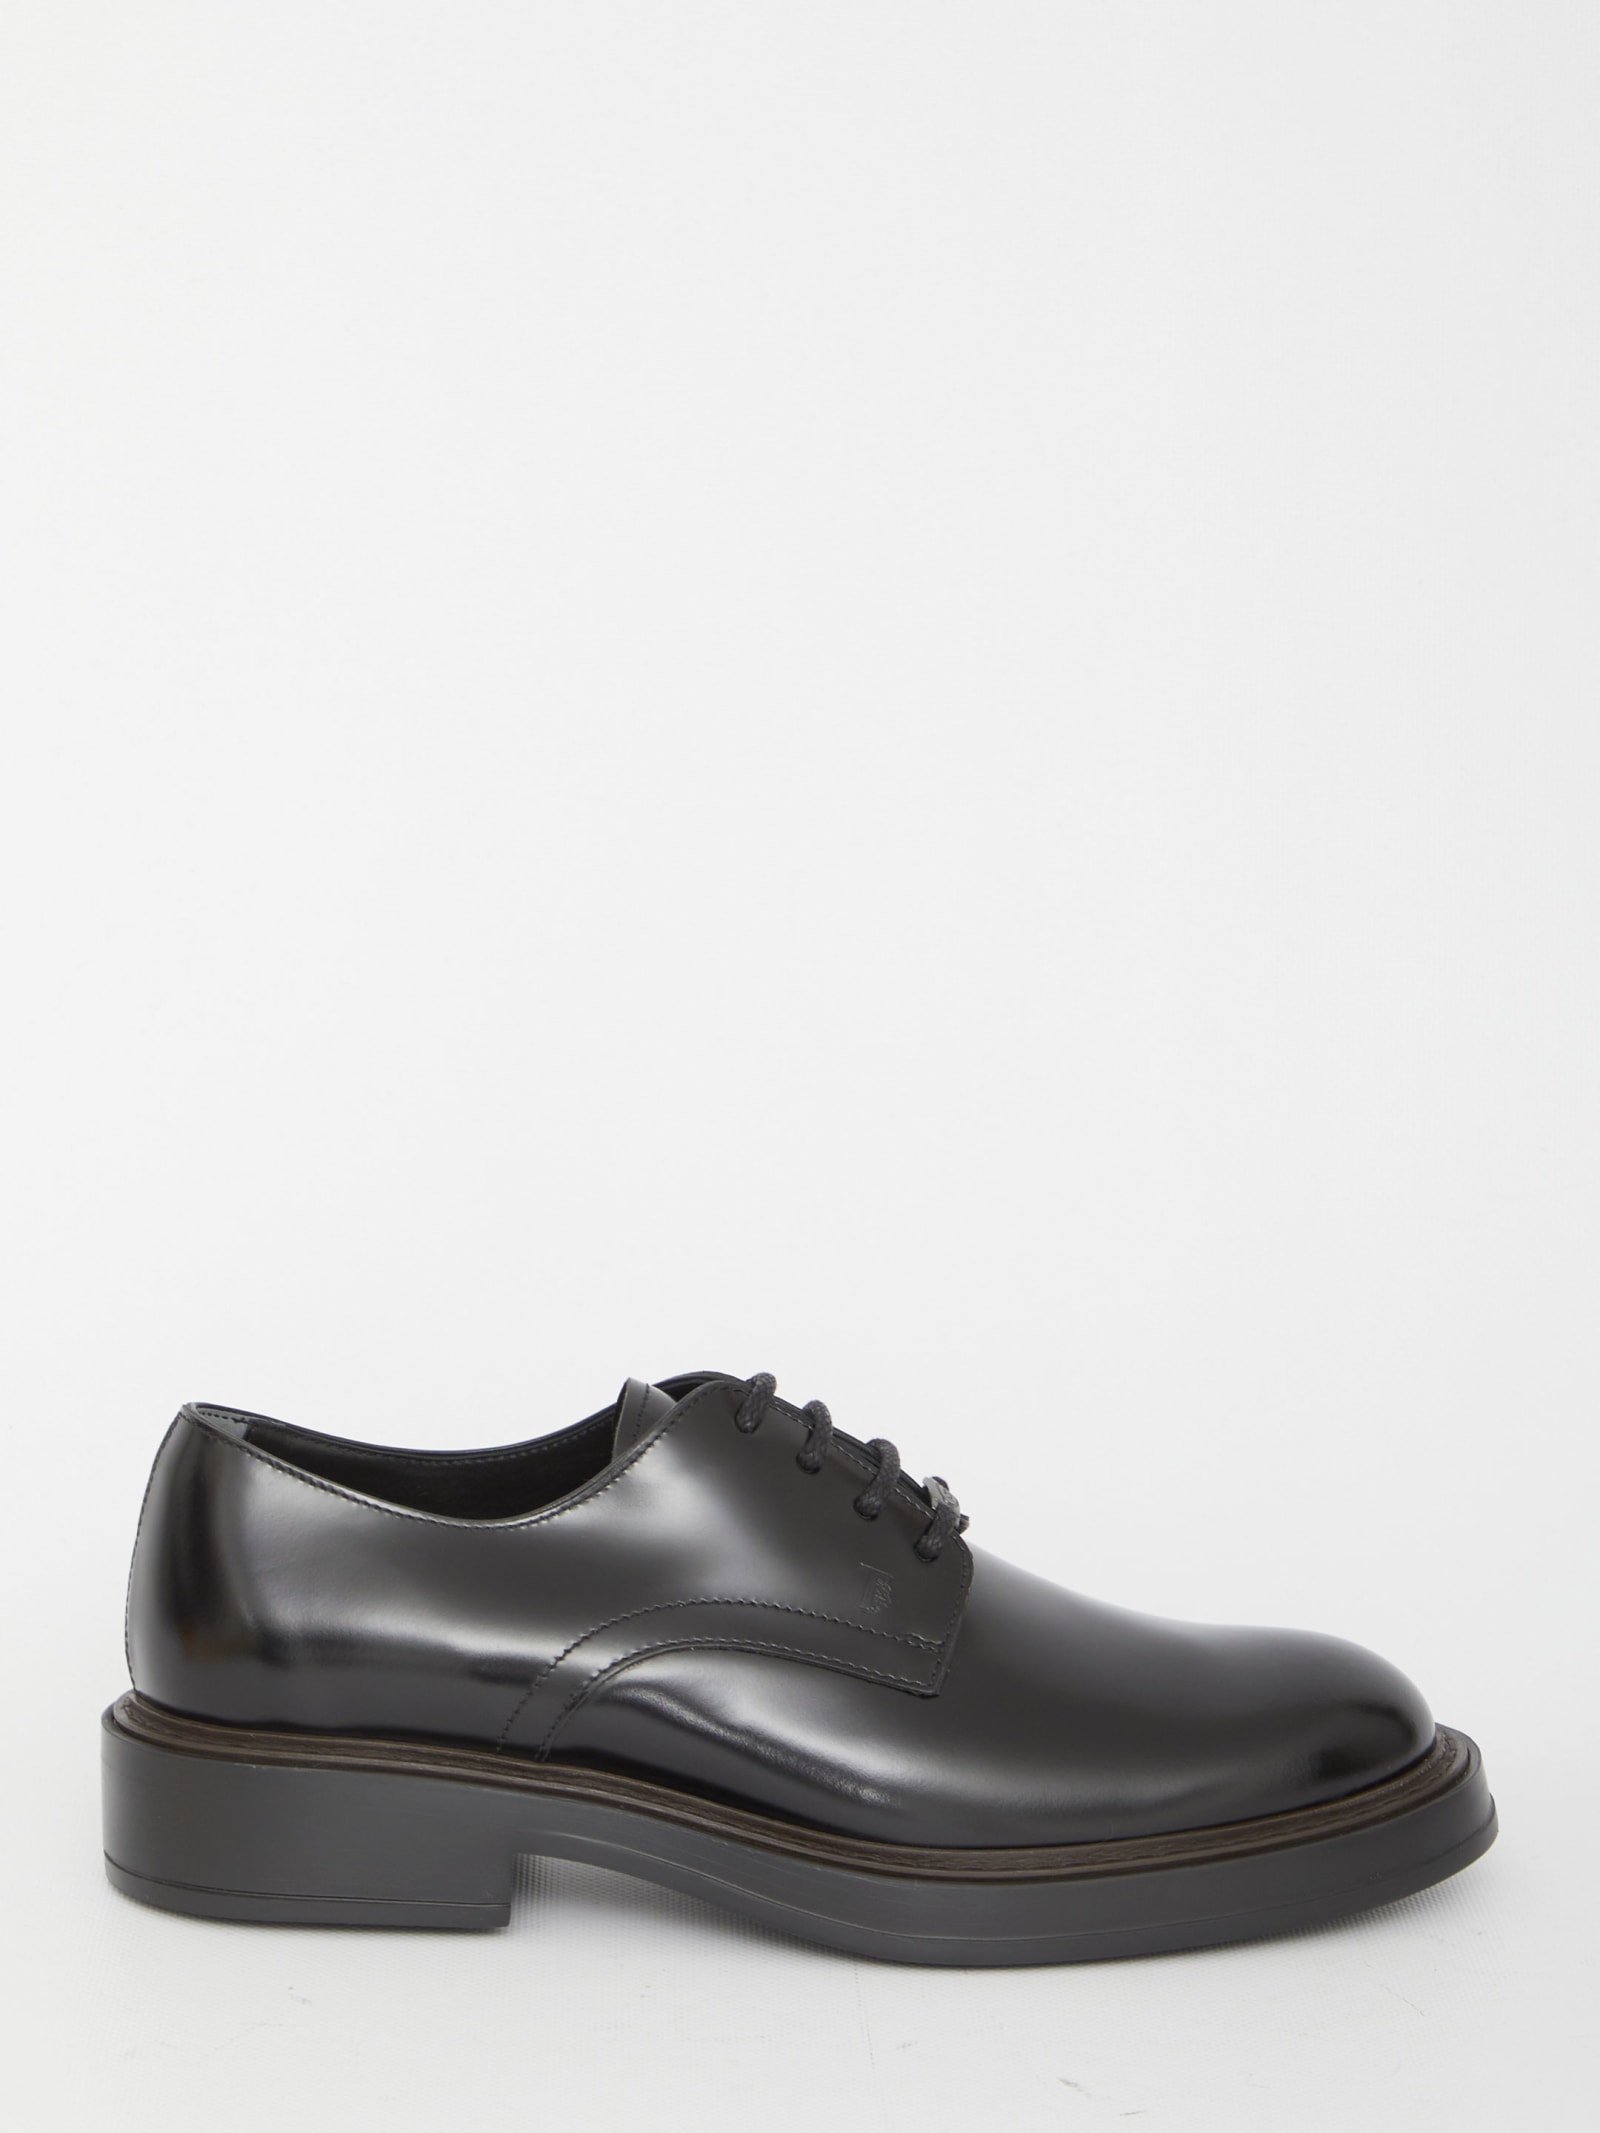 Tod's Leather Oxford Shoes